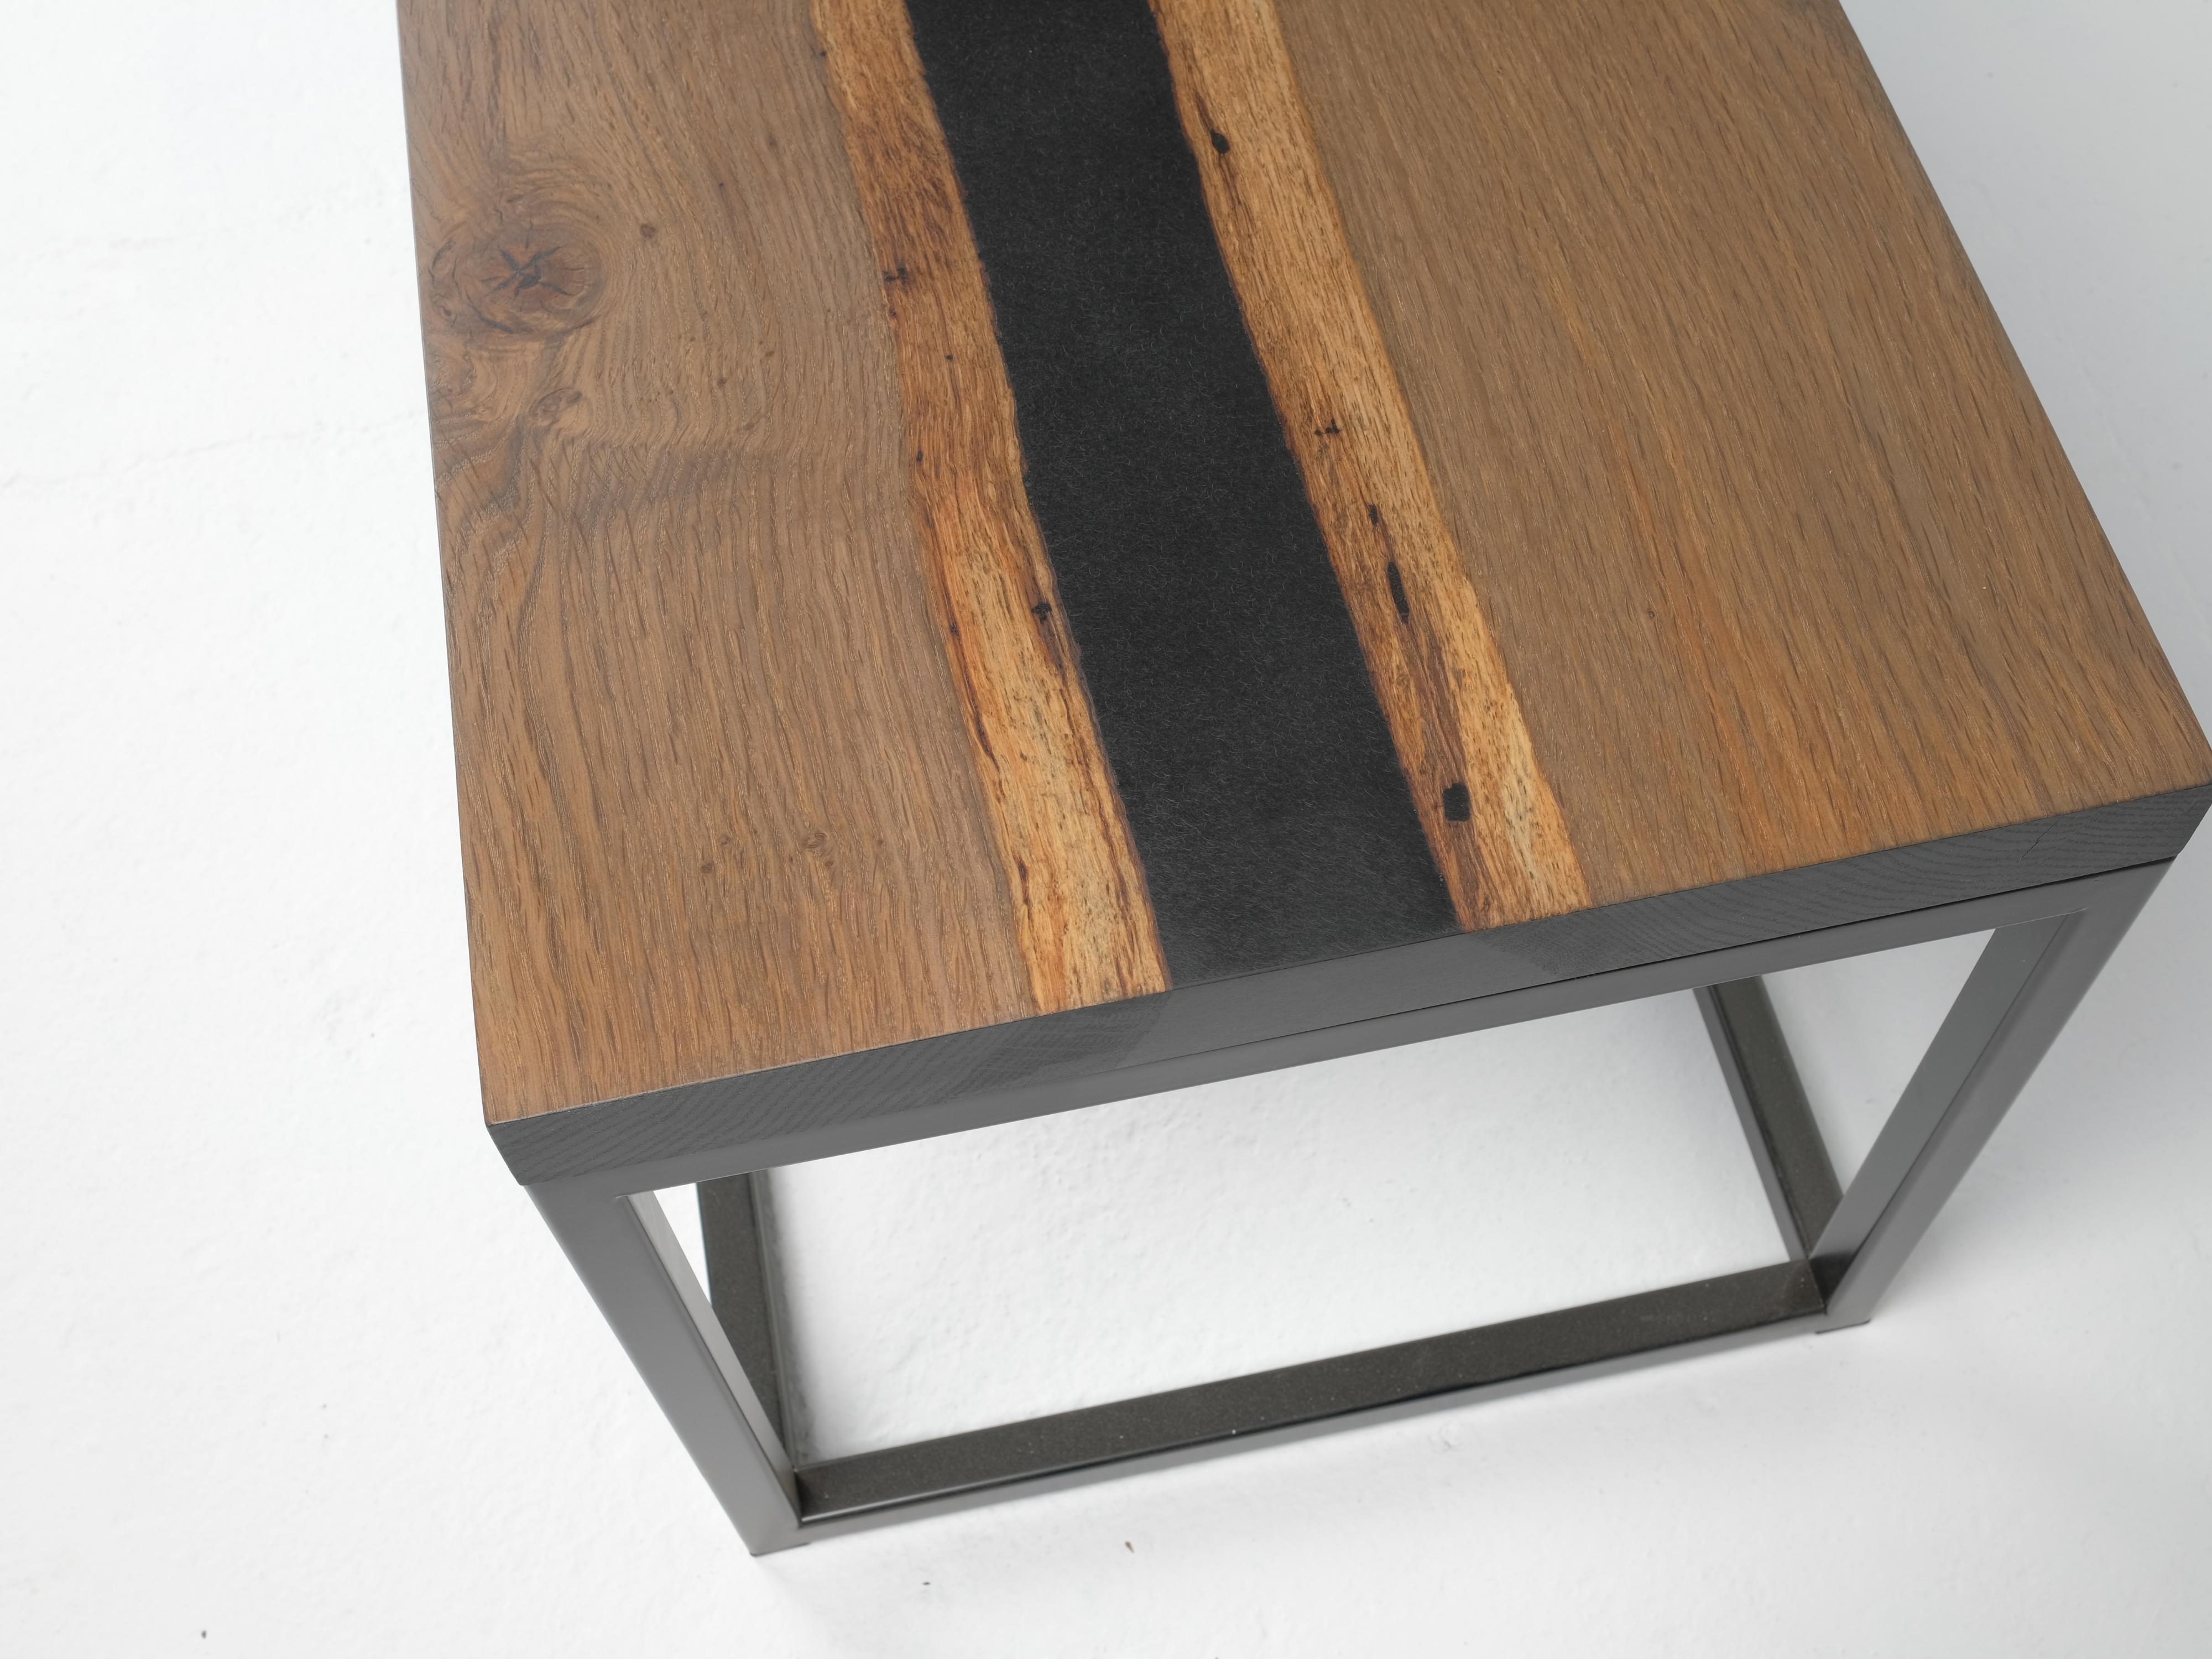 This one of a kind coffee table is made from live edge white oak; fumed to bring out the tannin rich grain and features a black epoxy river. The edges are dyed black with India ink. We cut and welded the base from steel tube and powder coated it in